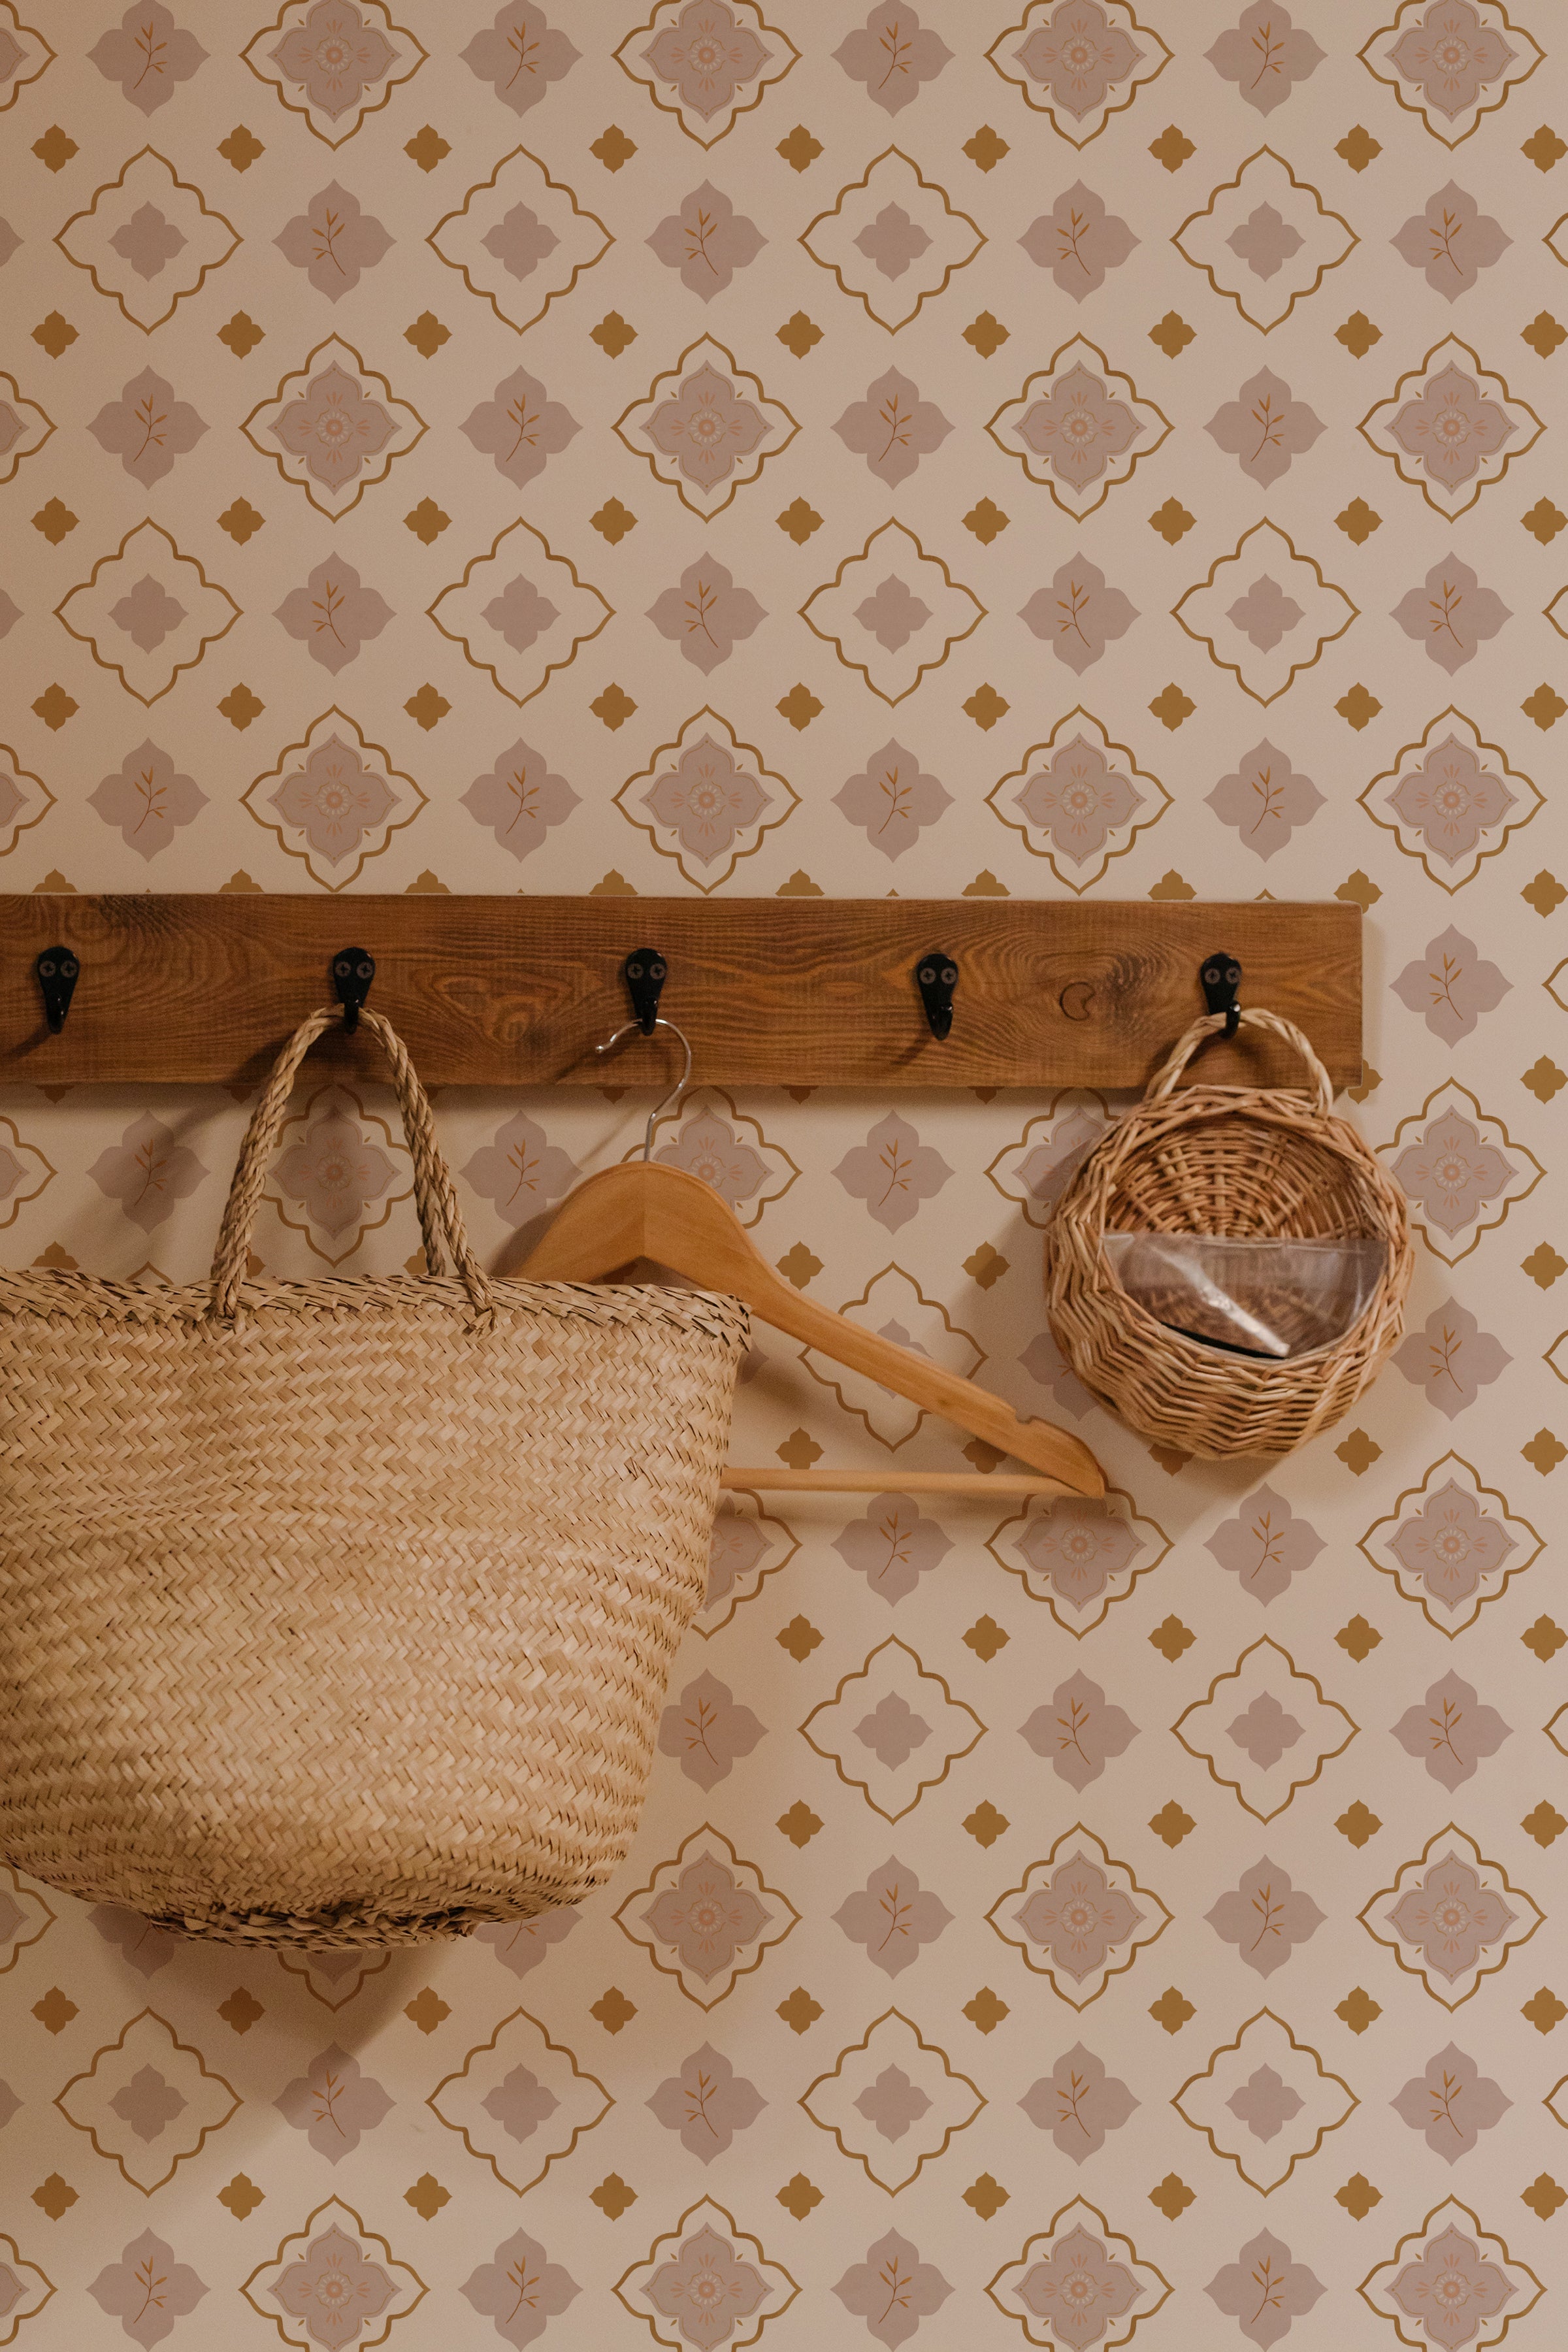 Wall-mounted wooden coat rack with hooks holding a woven tote bag and a small basket against a wall adorned with Moroccan Mosaic Wallpaper, featuring beige, blush, and gold geometric patterns